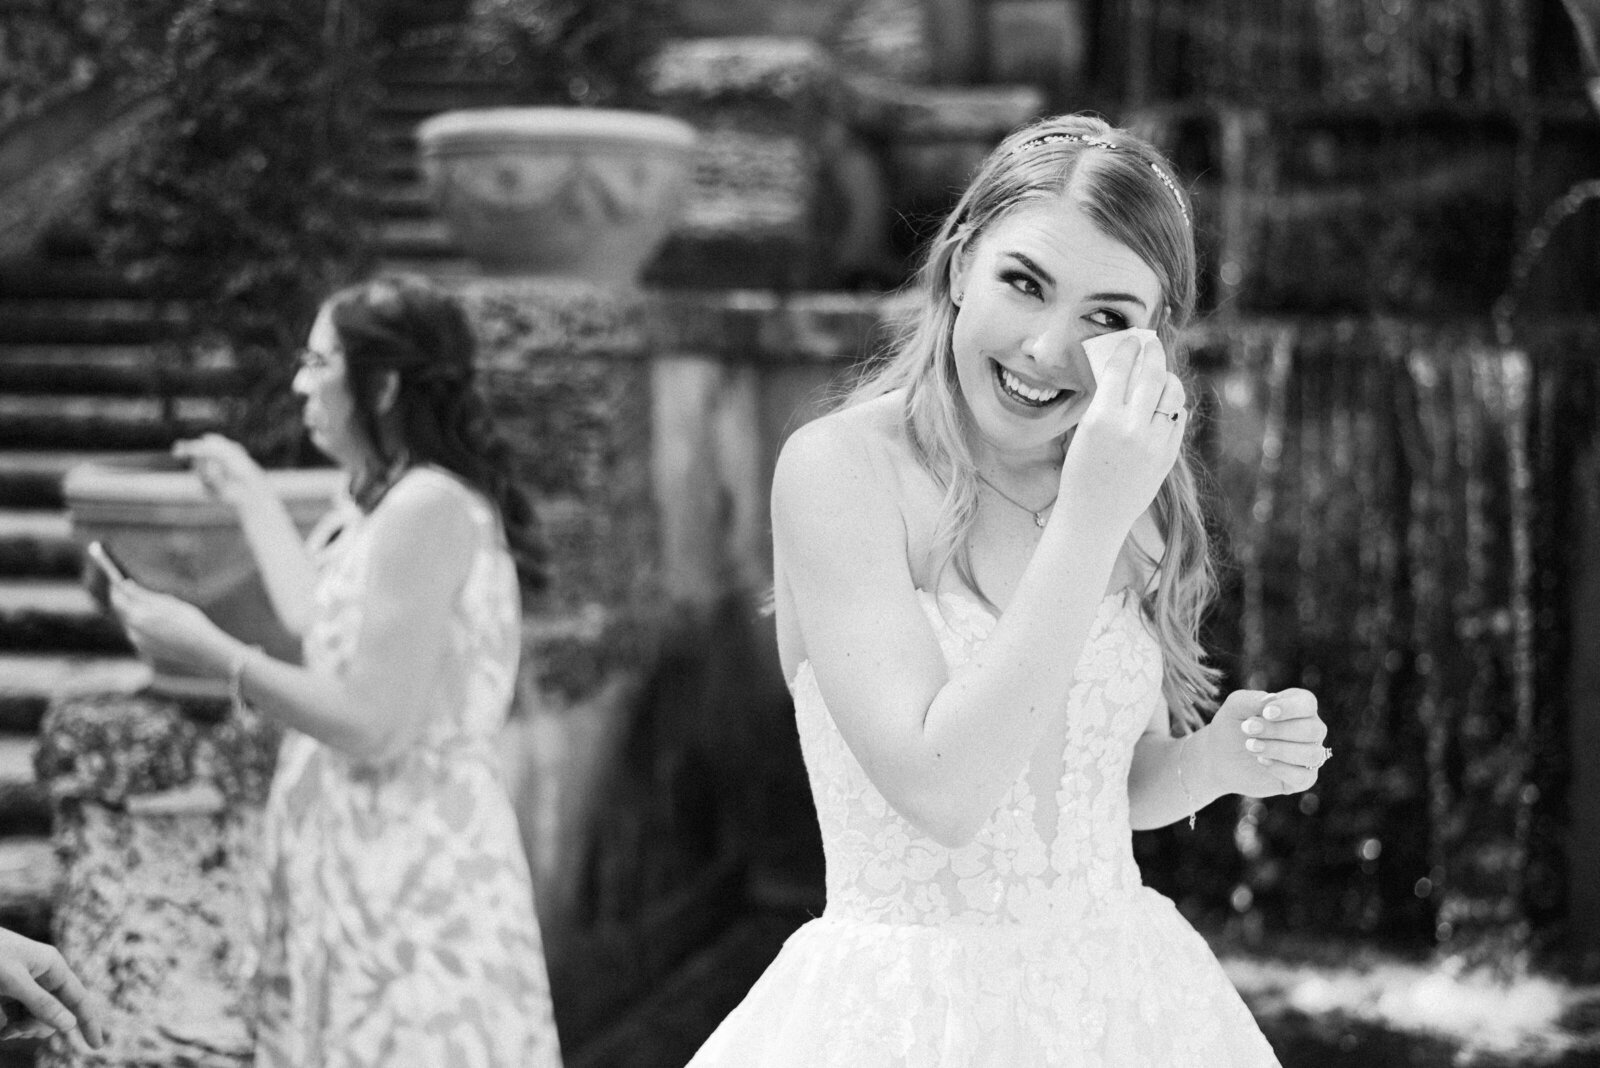 Bride wiping her eyes after her wedding ceremony.